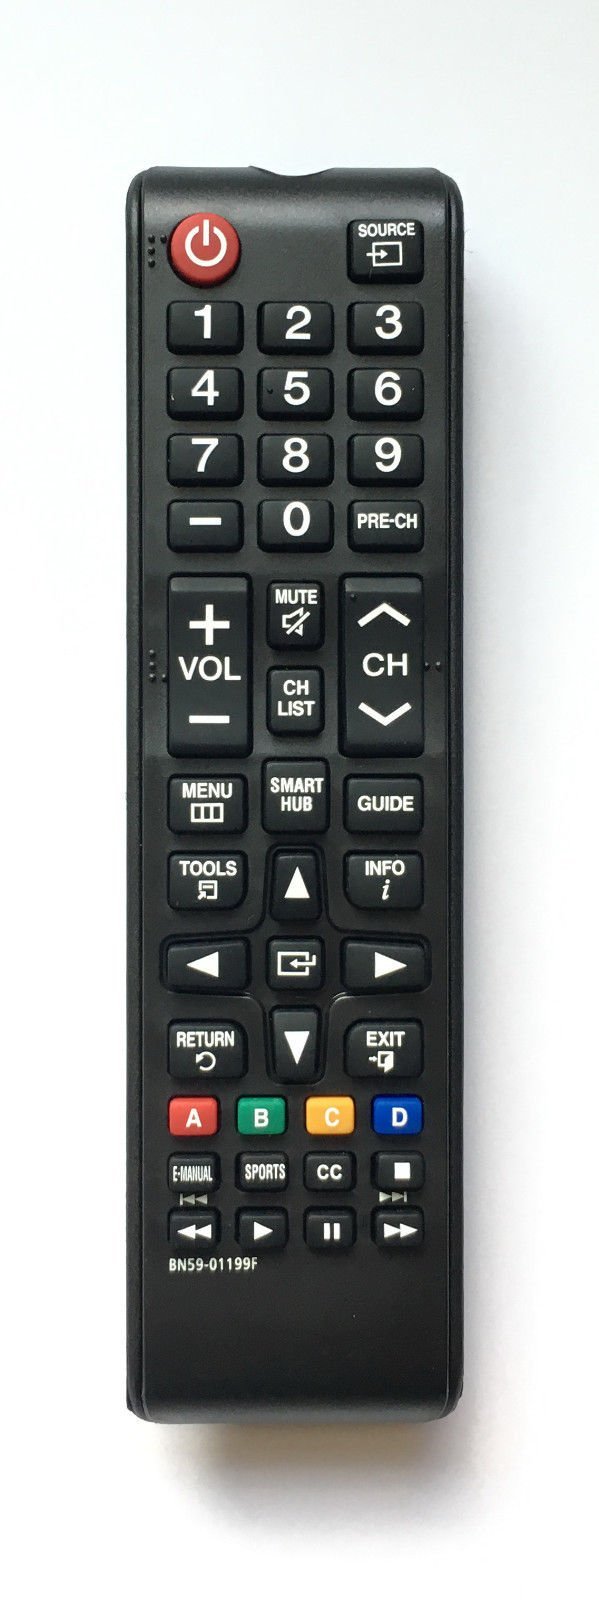 USBRMT New Samsung Replacement Remote BN59-01199F for Samsung LCD LED HDTV Smart TV